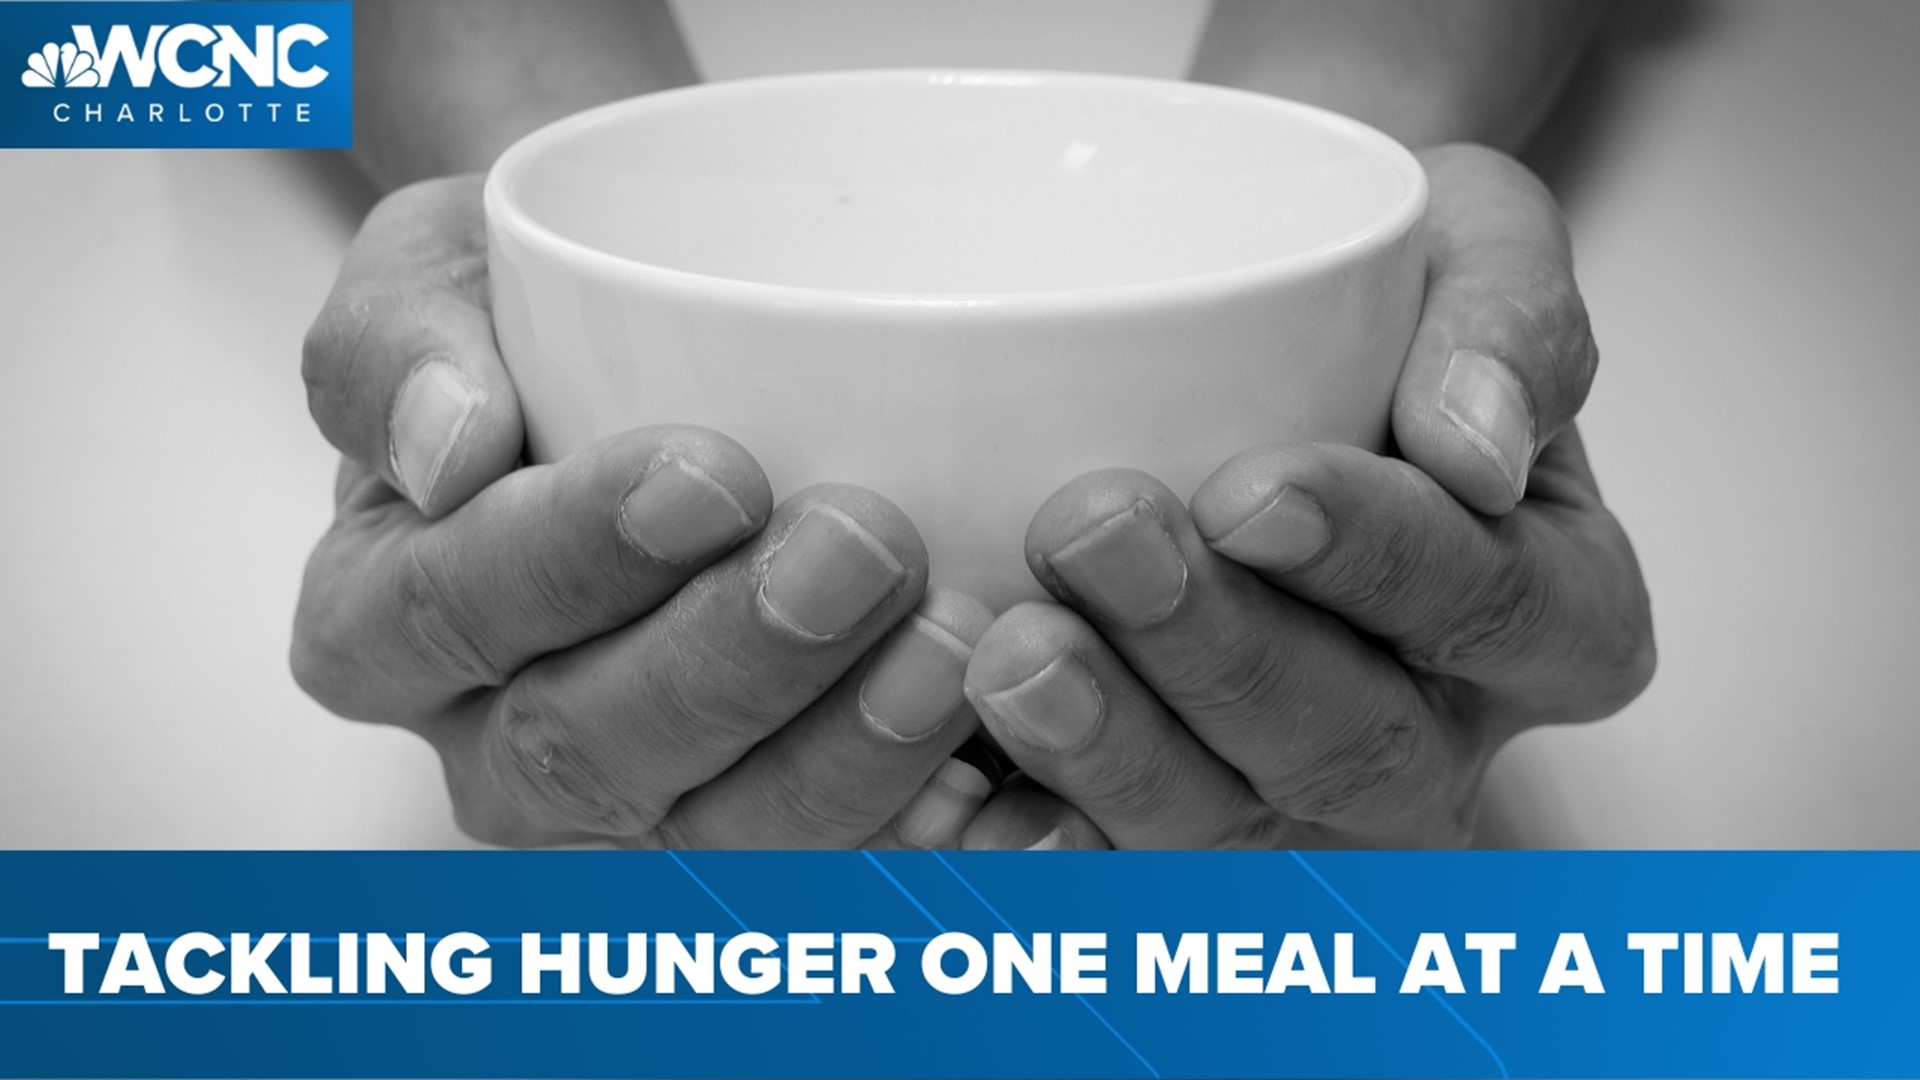 A local organization is working to combat hunger, one meal at a time. Jesse Pierre has their story.